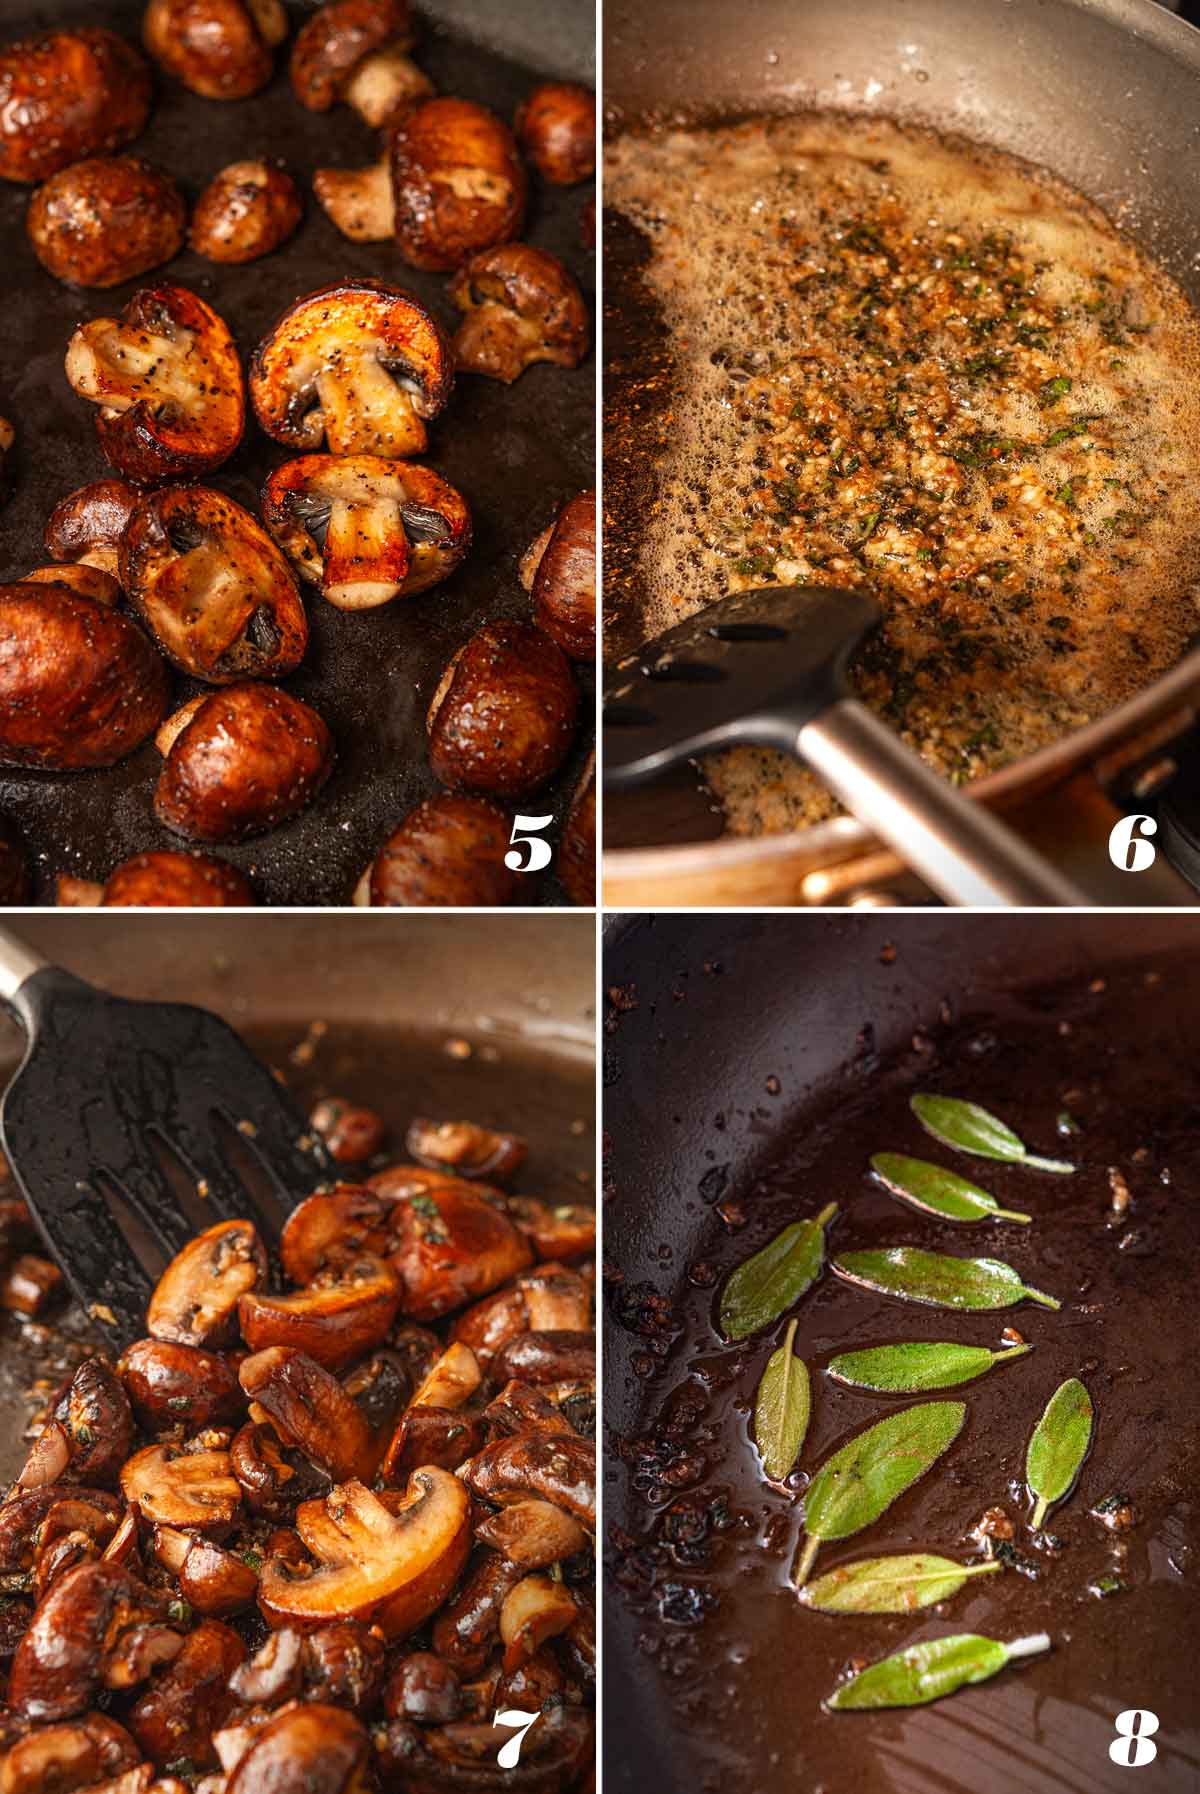 A collage of 4 numbered images showing how to sear and butter mushrooms.